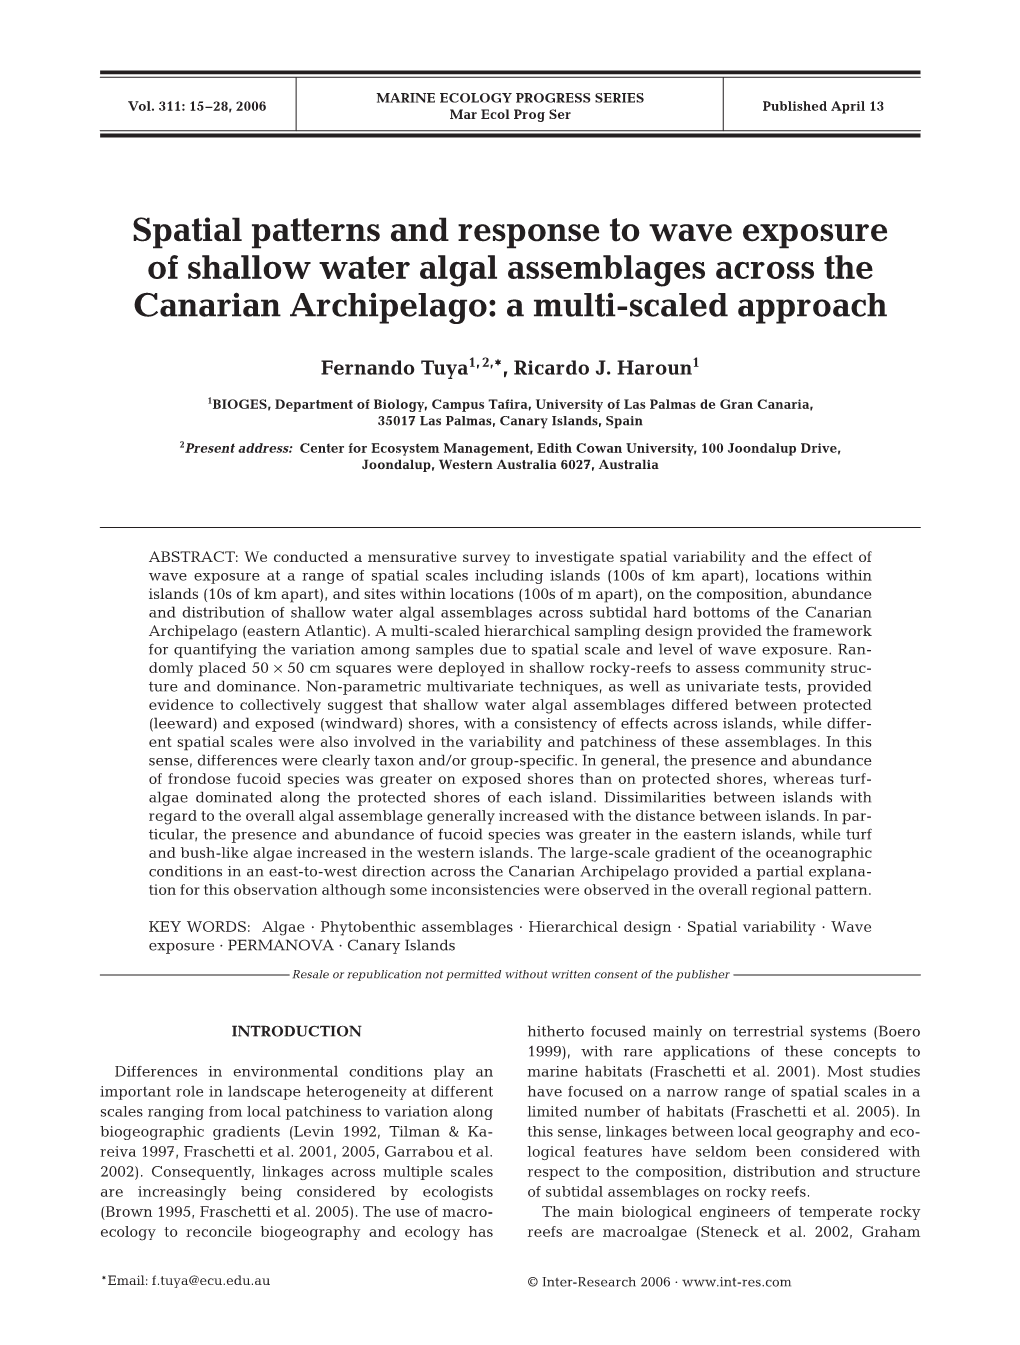 Spatial Patterns and Response to Wave Exposure of Shallow Water Algal Assemblages Across the Canarian Archipelago: a Multi-Scaled Approach